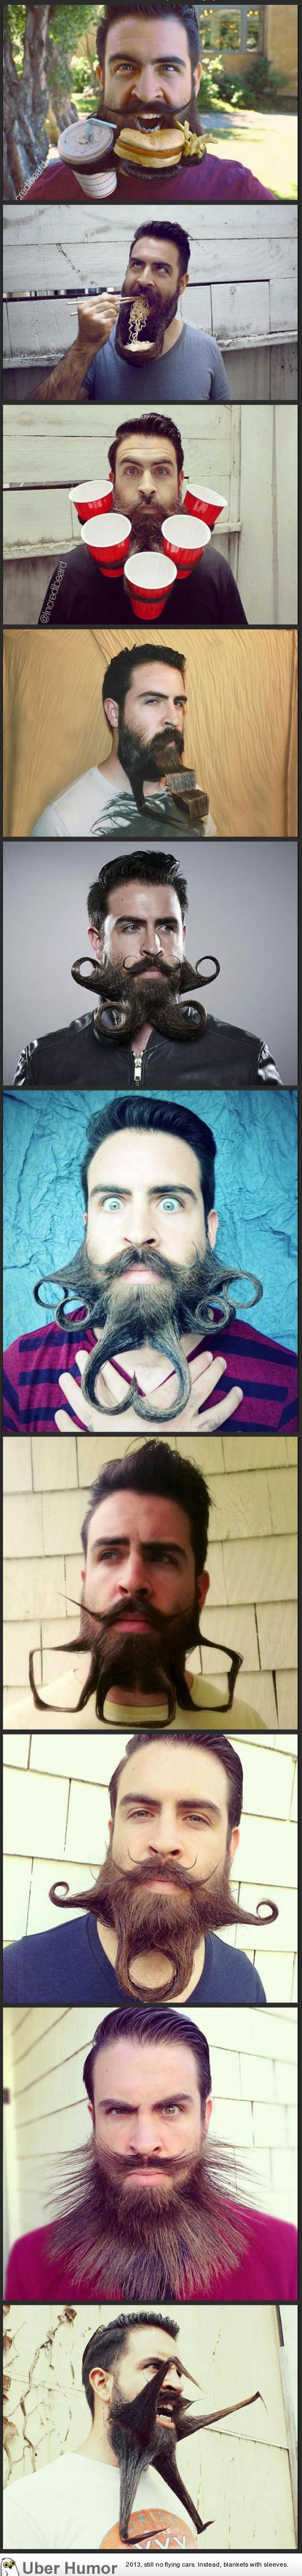 In honor of no shave November, crazy beard guy! | Funny Pictures, Quotes,  Pics, Photos, Images. Videos of Really Very Cute animals.